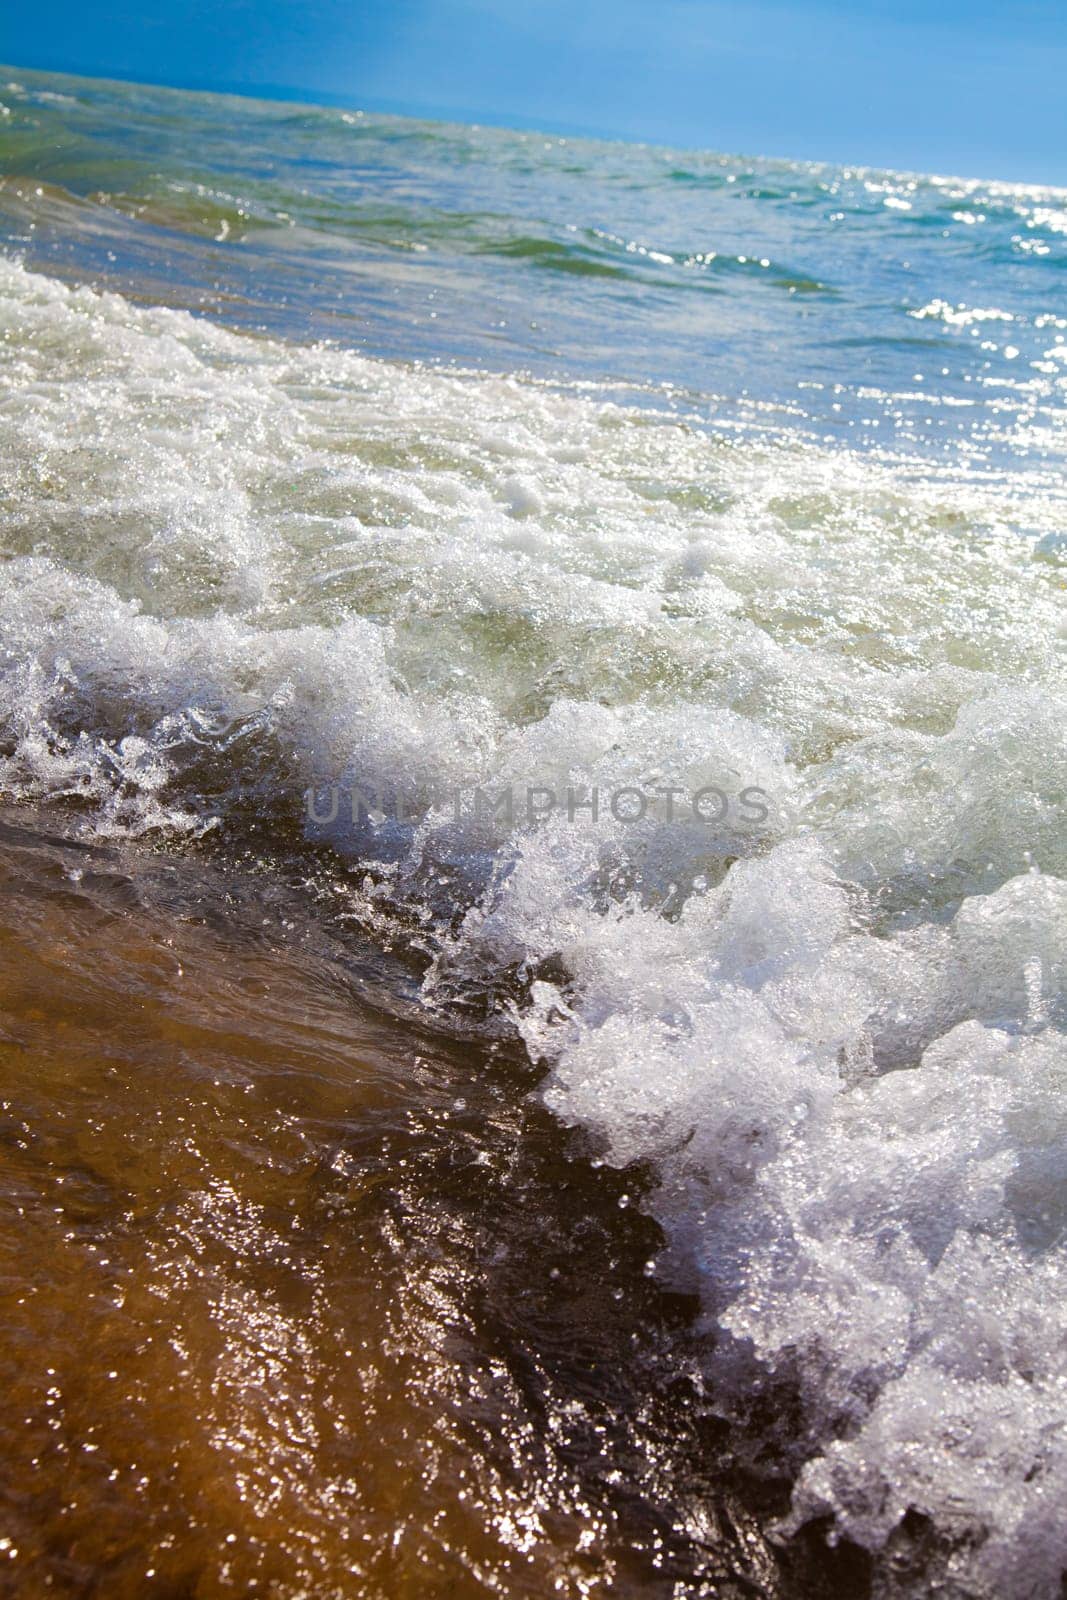 Experience the raw power and tranquil beauty of Lake Michigan's crashing waves on a sunny day at the beach - a perfect summer getaway.